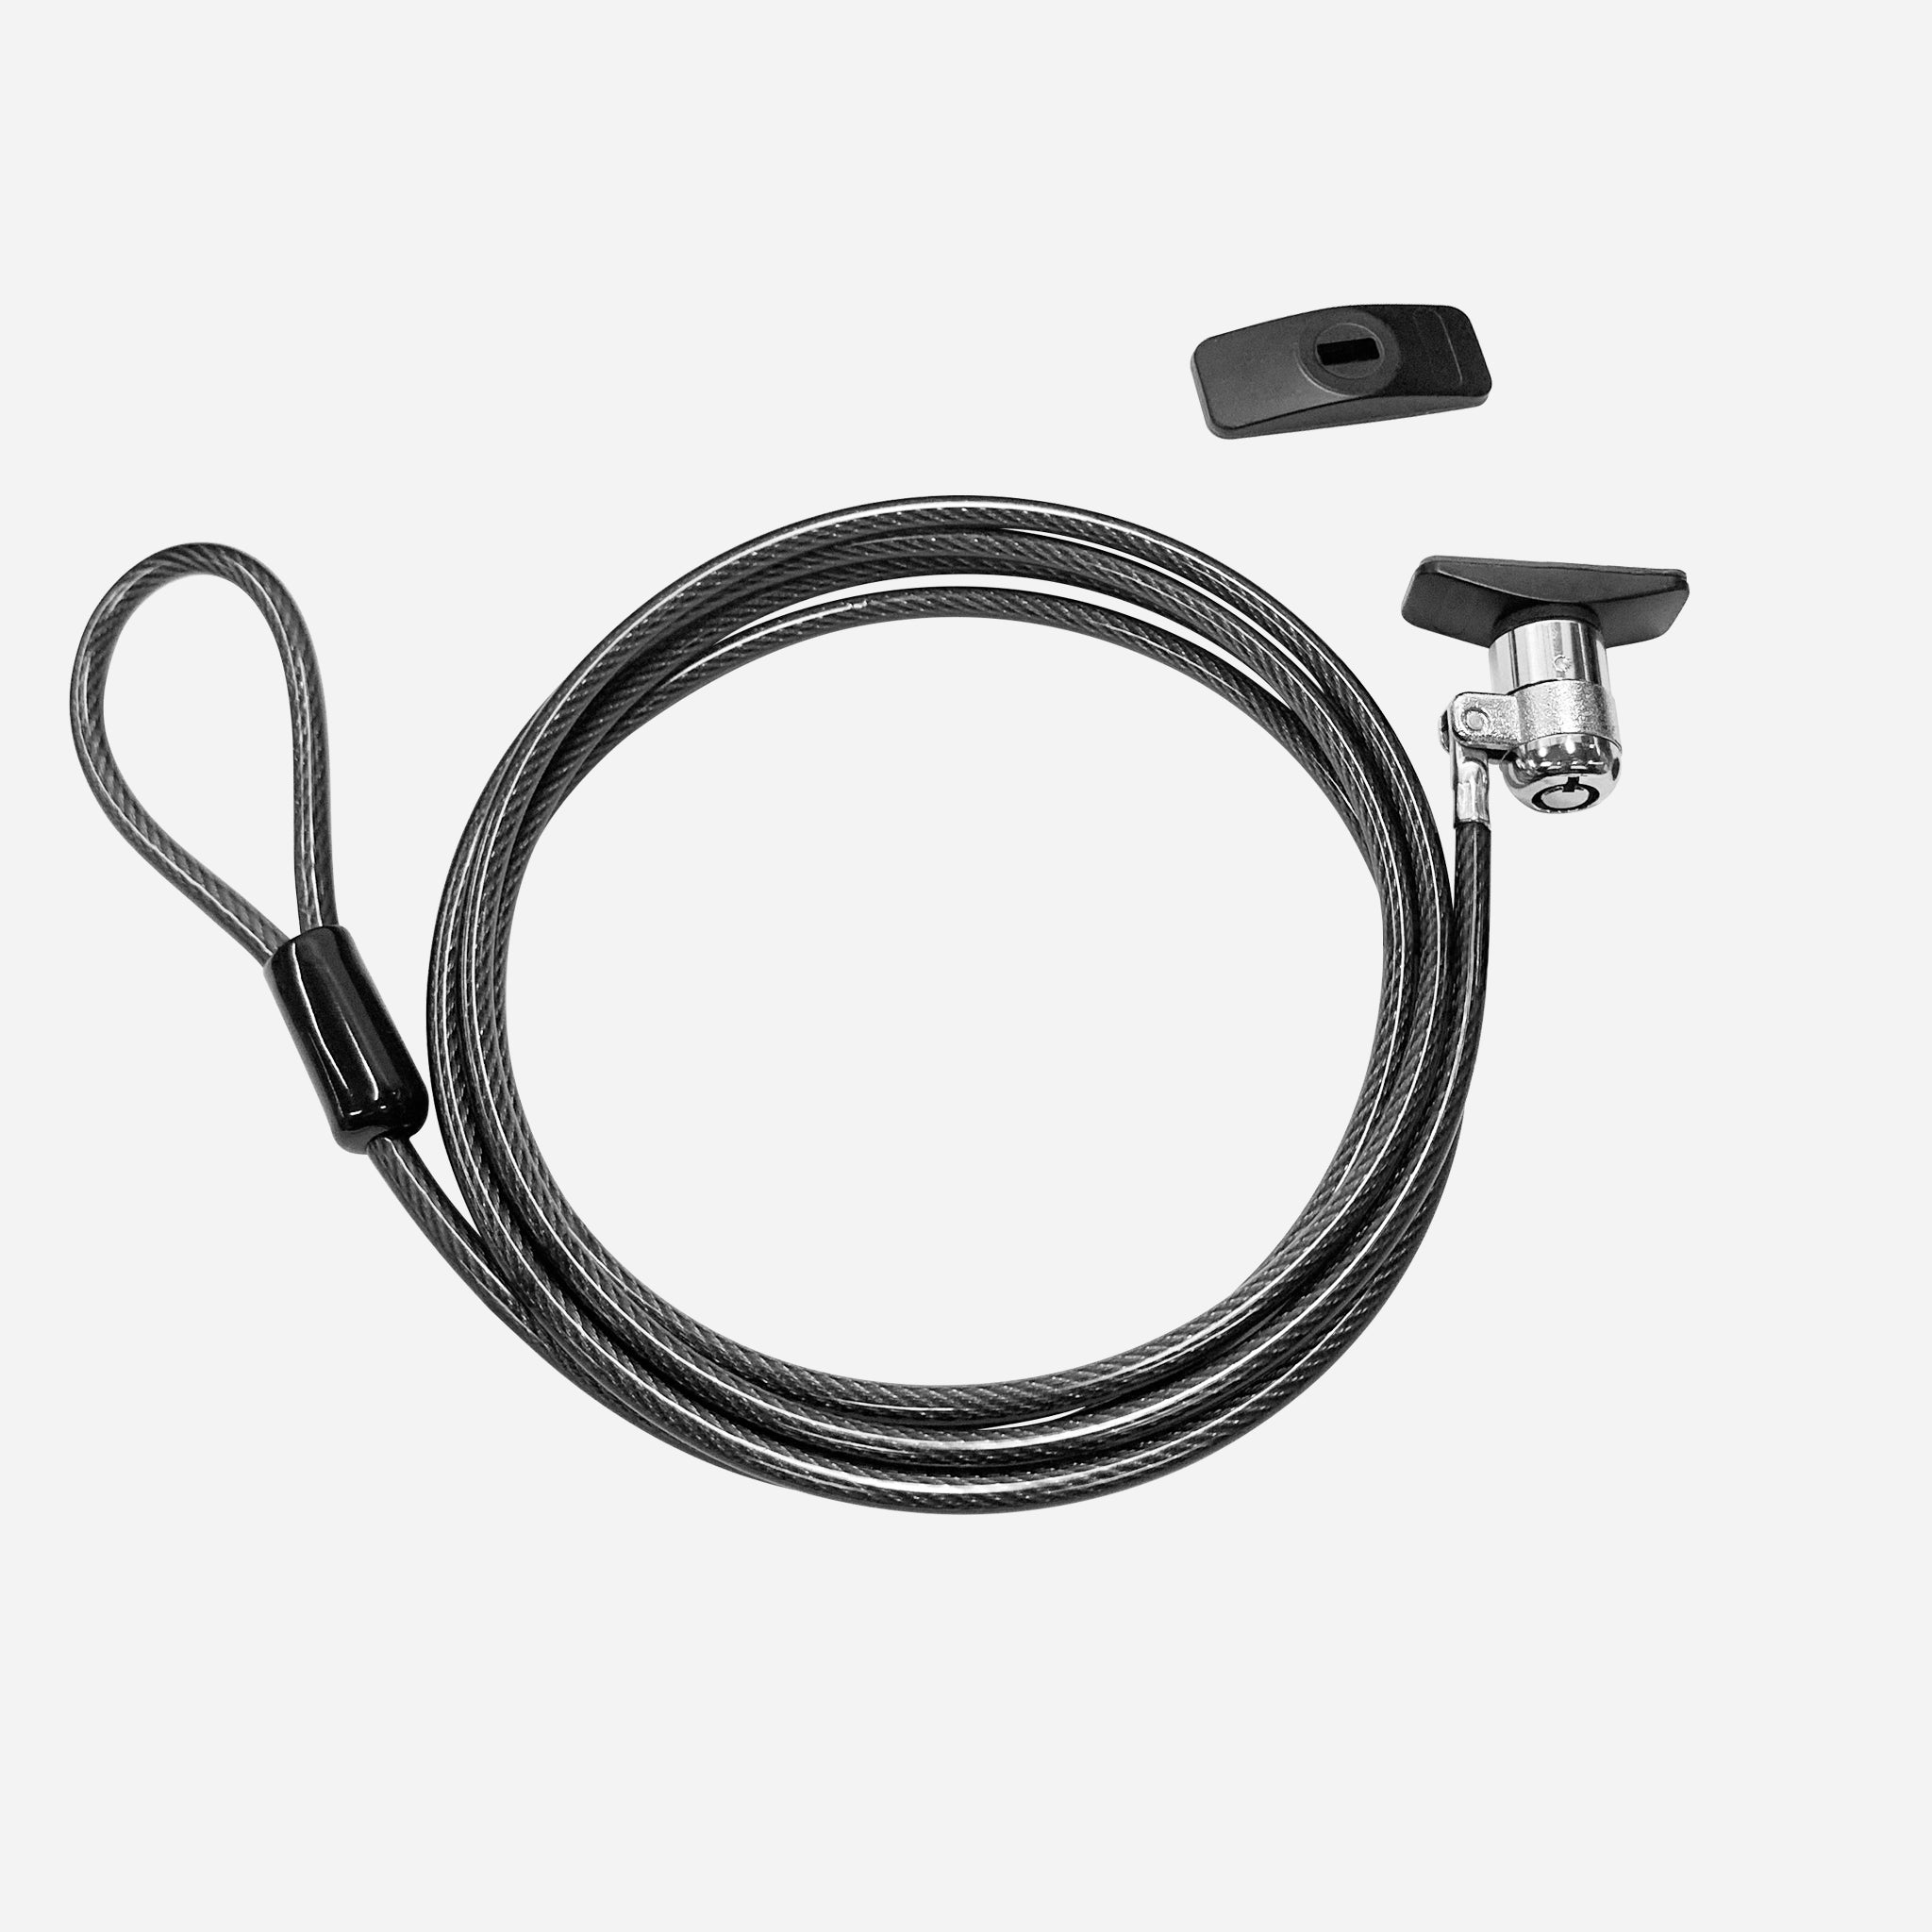 Navilock Products 20676 Navilock Laptop Security Cable with 3